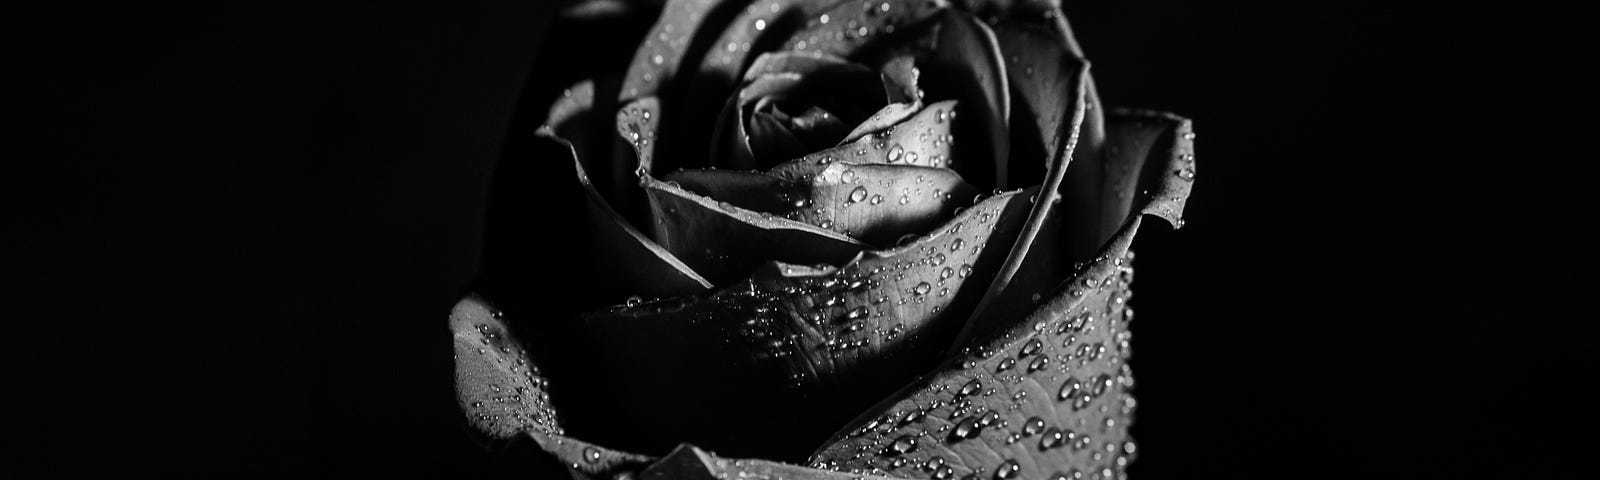 A black rose in front of a black background